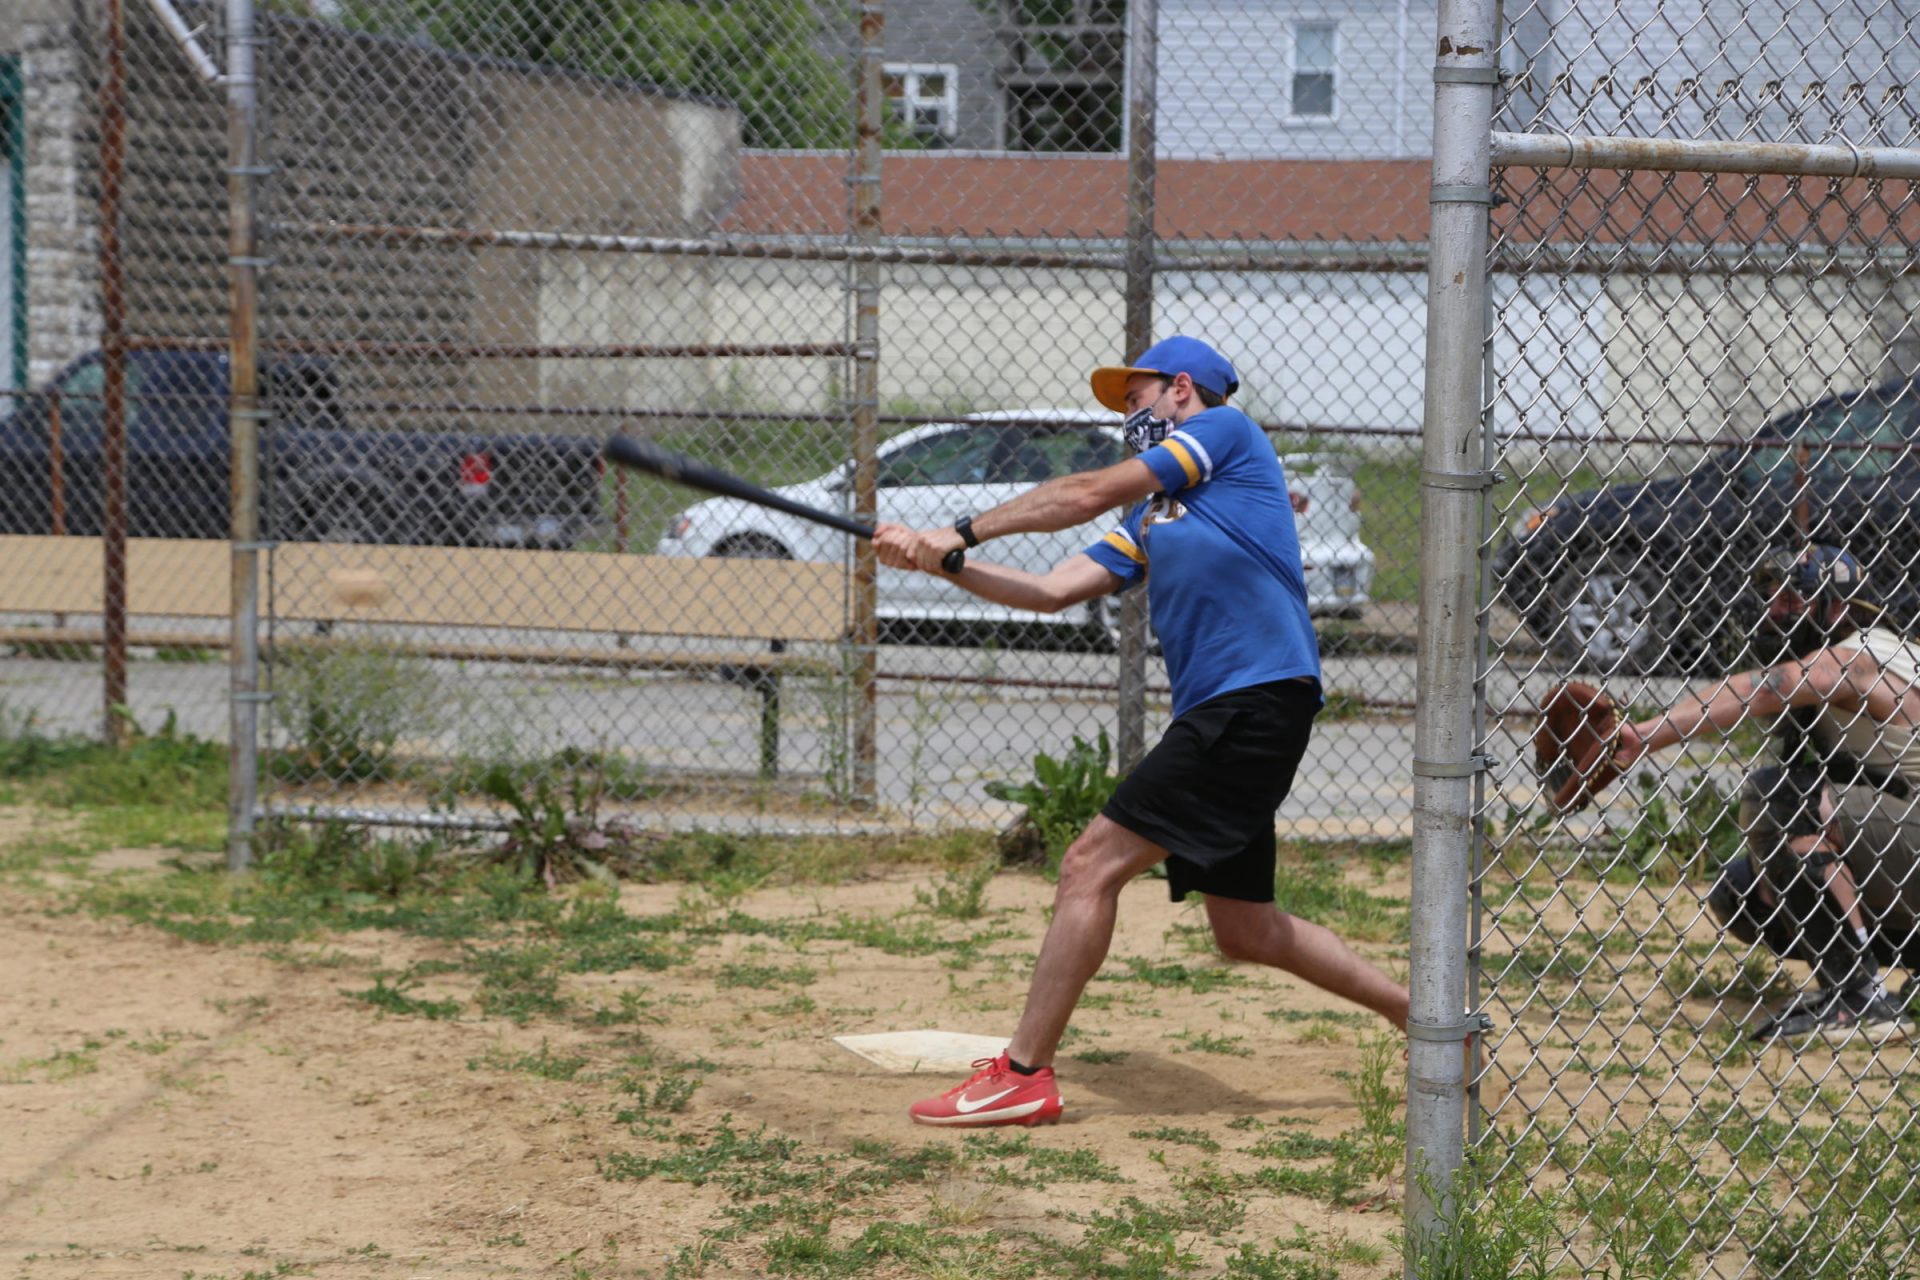 Jesse Caggino, wearing an Allegheny A's t-shirt, bats at a Dock Ellis League game on Sunday, June 14, 2020.